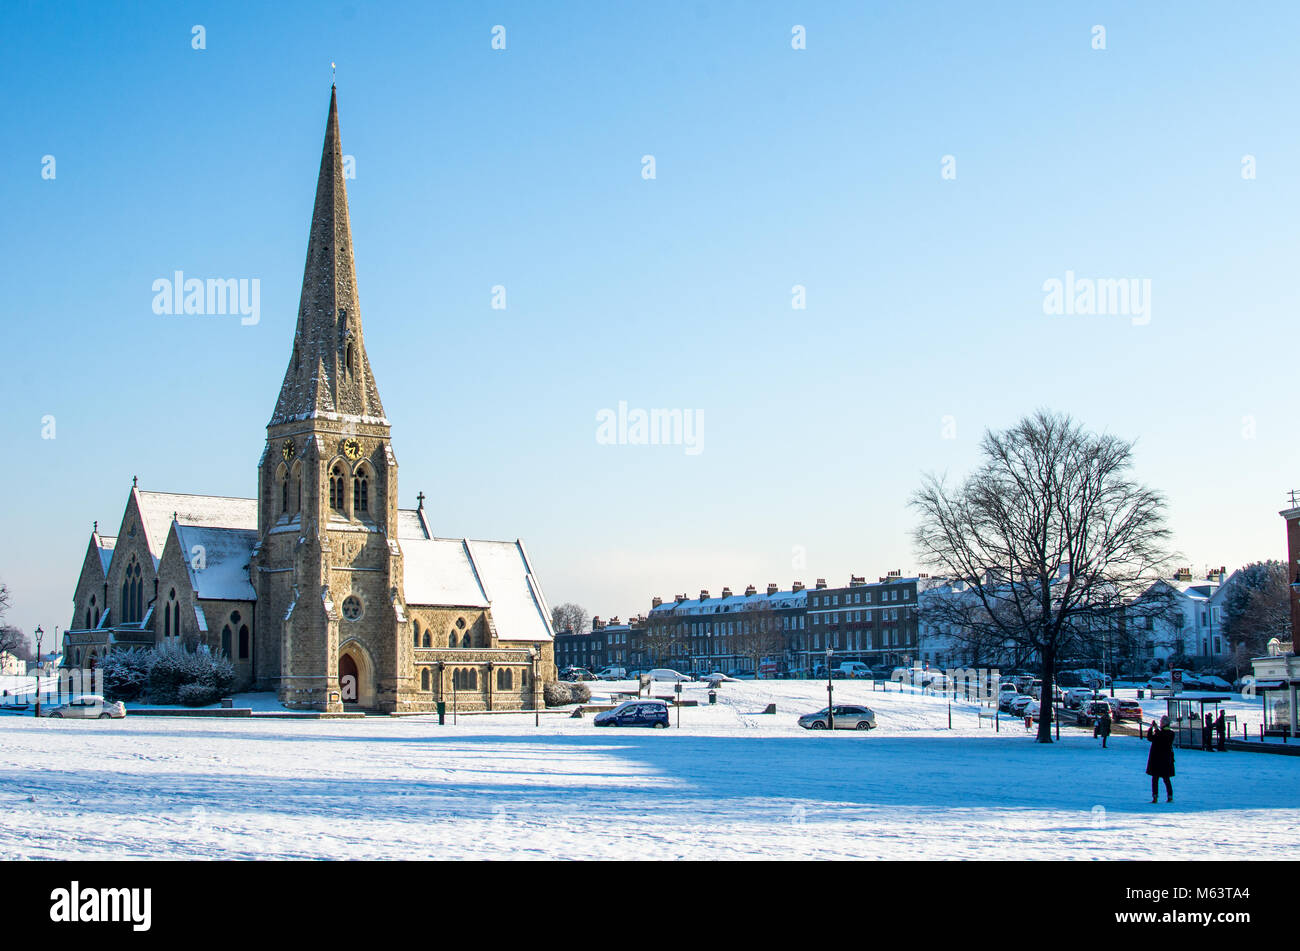 Blackheath. 27th Feb, 2018. UK Weather: All Saints church at Blackheath, London, during the cold spell in late February/early March 2018 dubbed the "beast from the east." Credit: Tim M/Alamy Live News Stock Photo